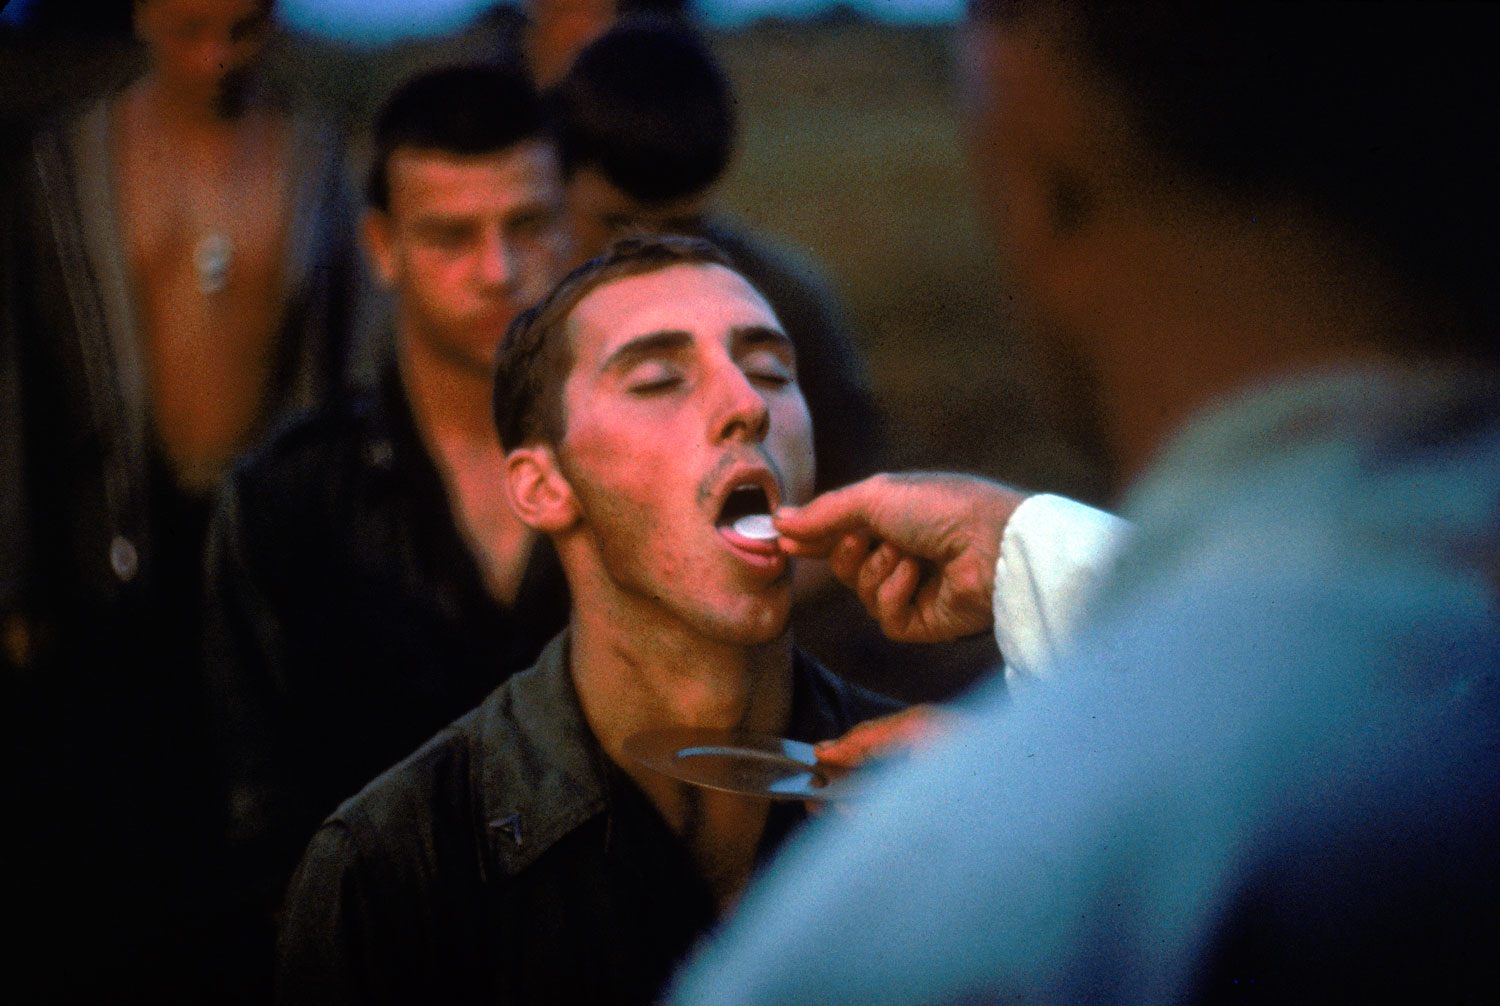 Not published in LIFE. American Marines receive the sacrament of Communion during a lull in the fighting near the DMZ during the Vietnam War, October 1966.